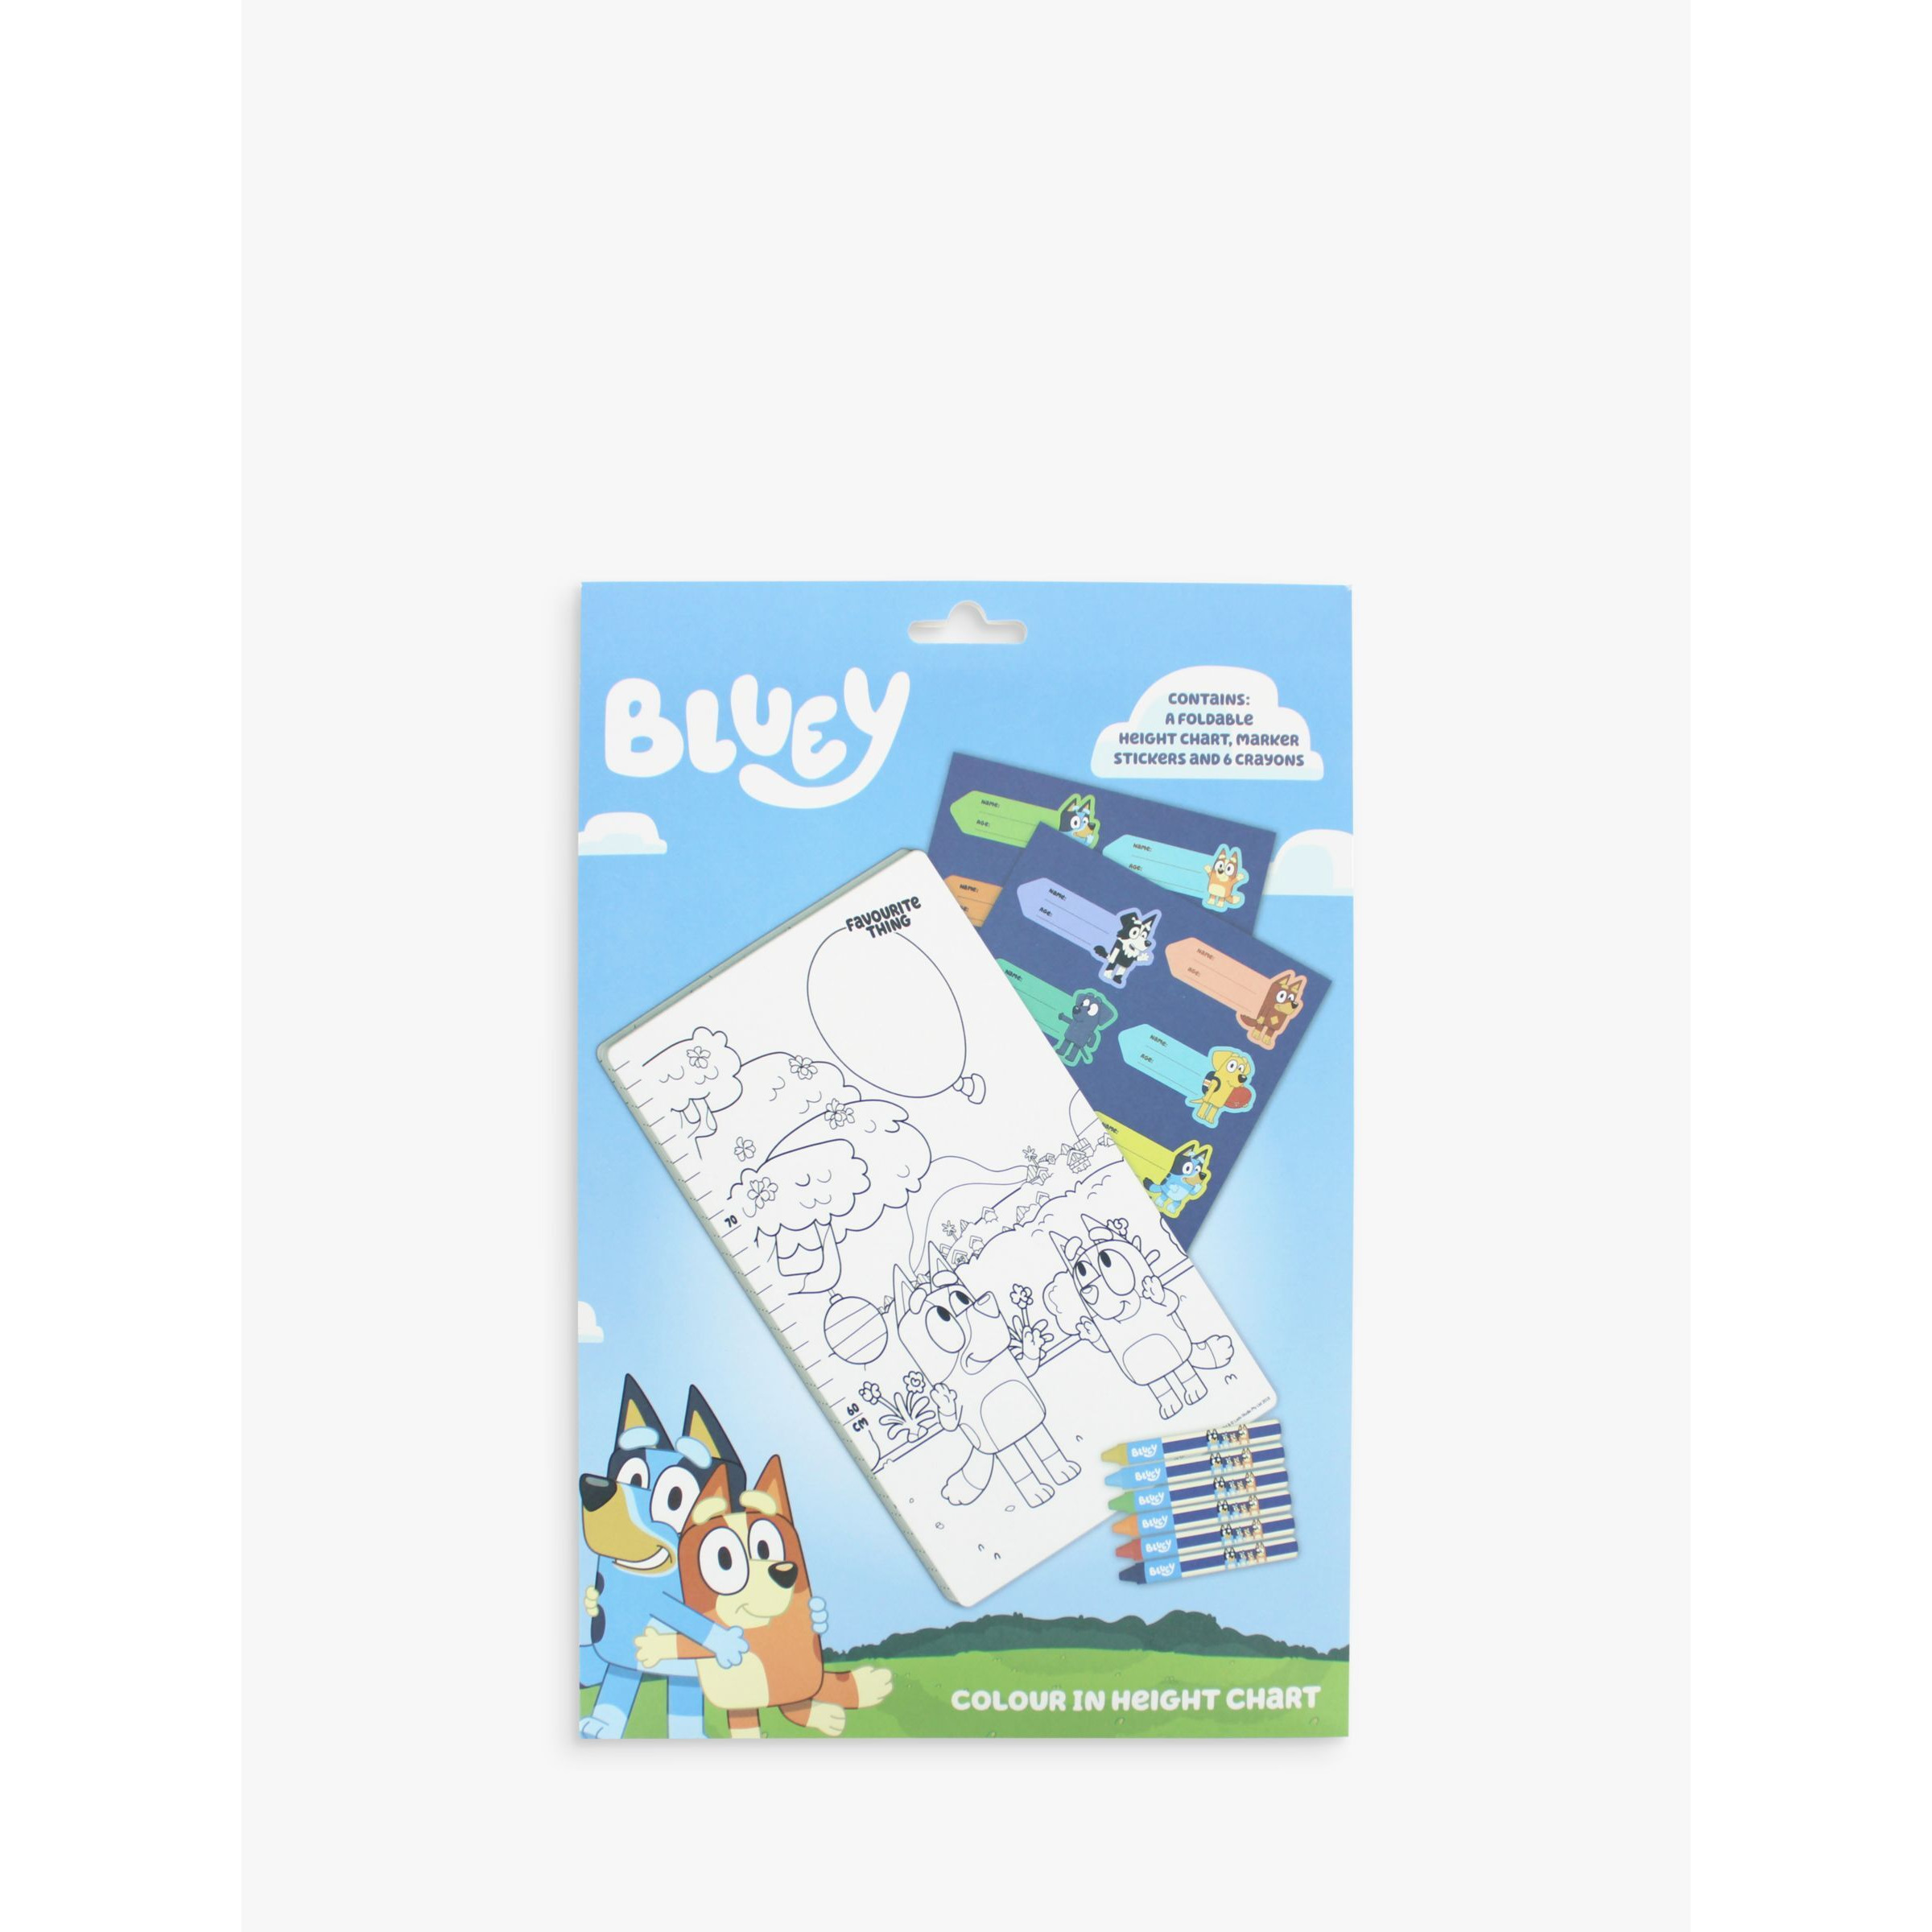 Bluey Colour In Height Chart & Crayon Set, Multi - image 1